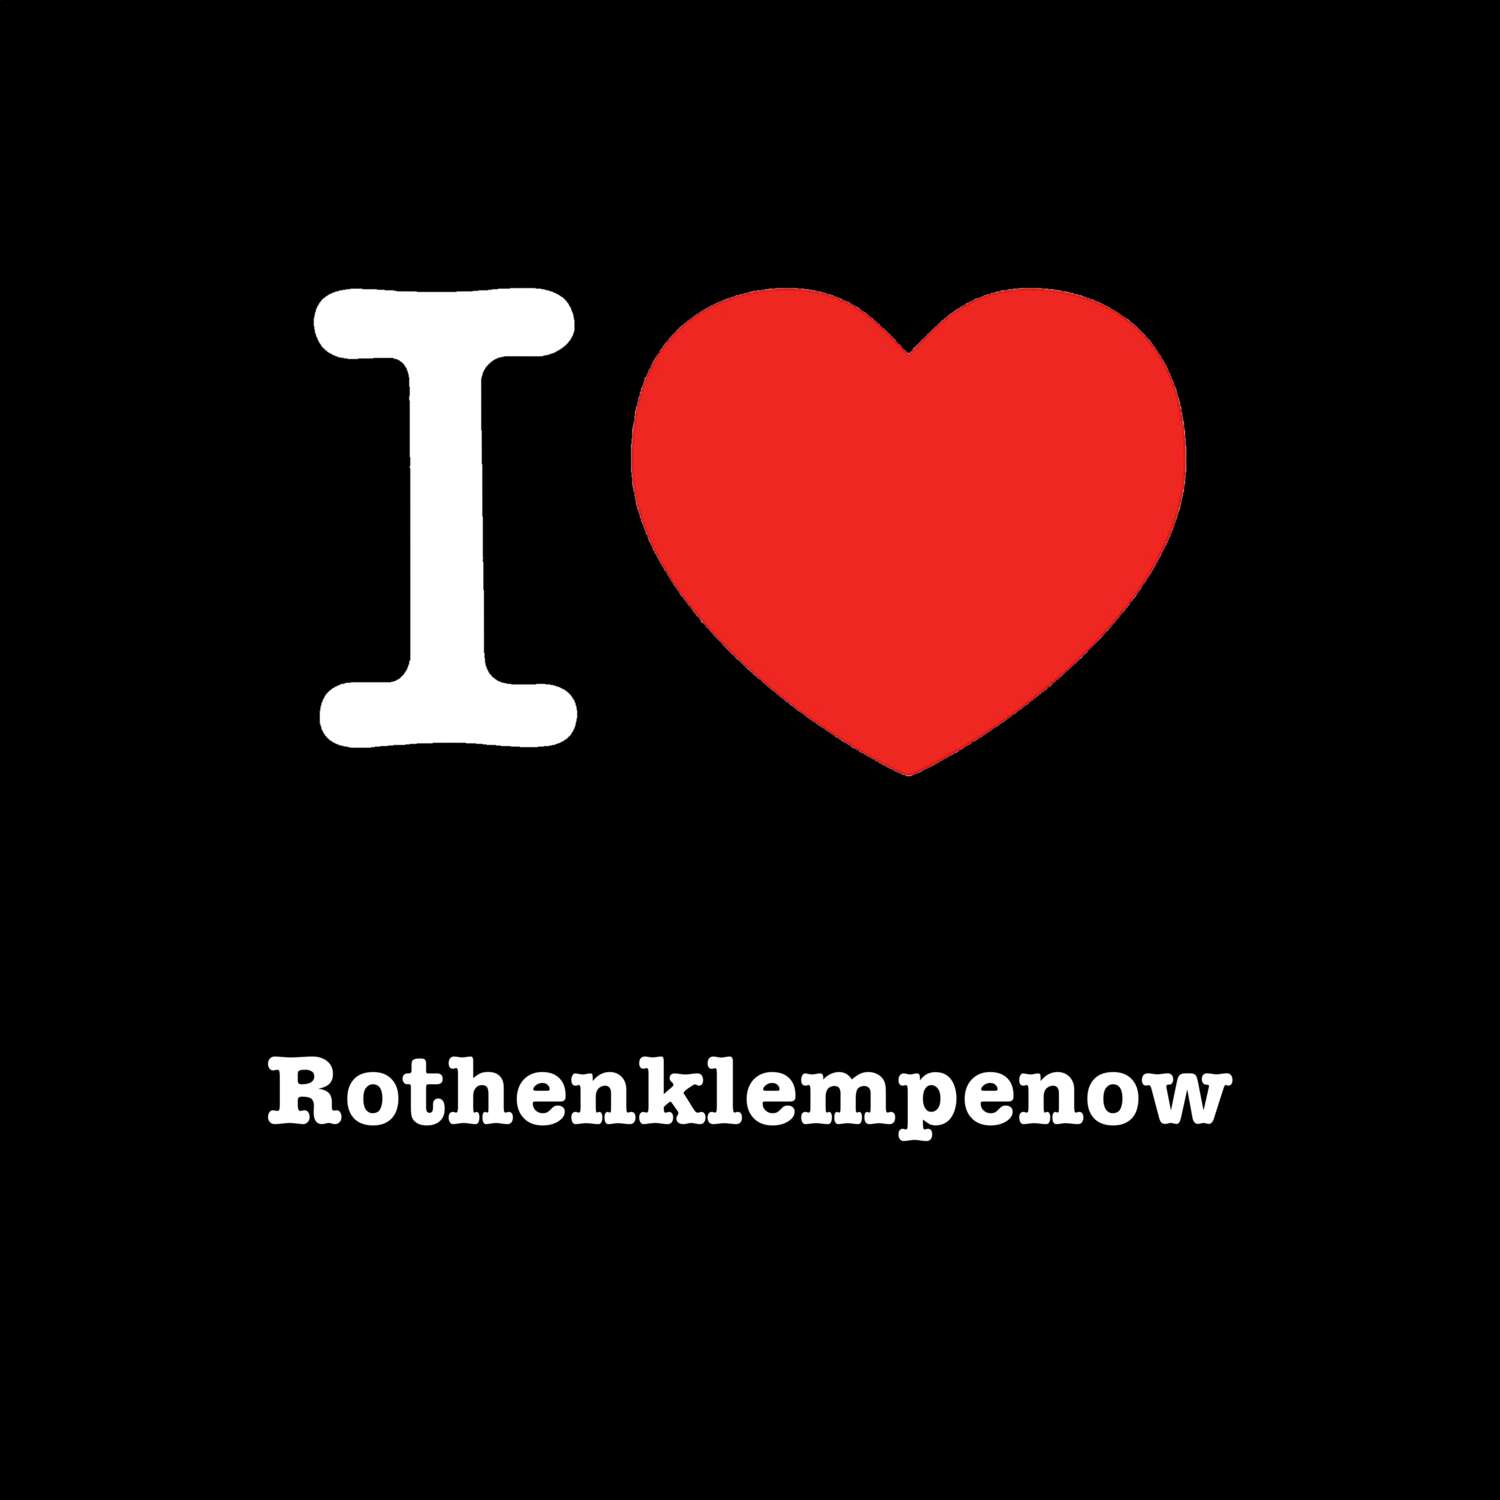 Rothenklempenow T-Shirt »I love«